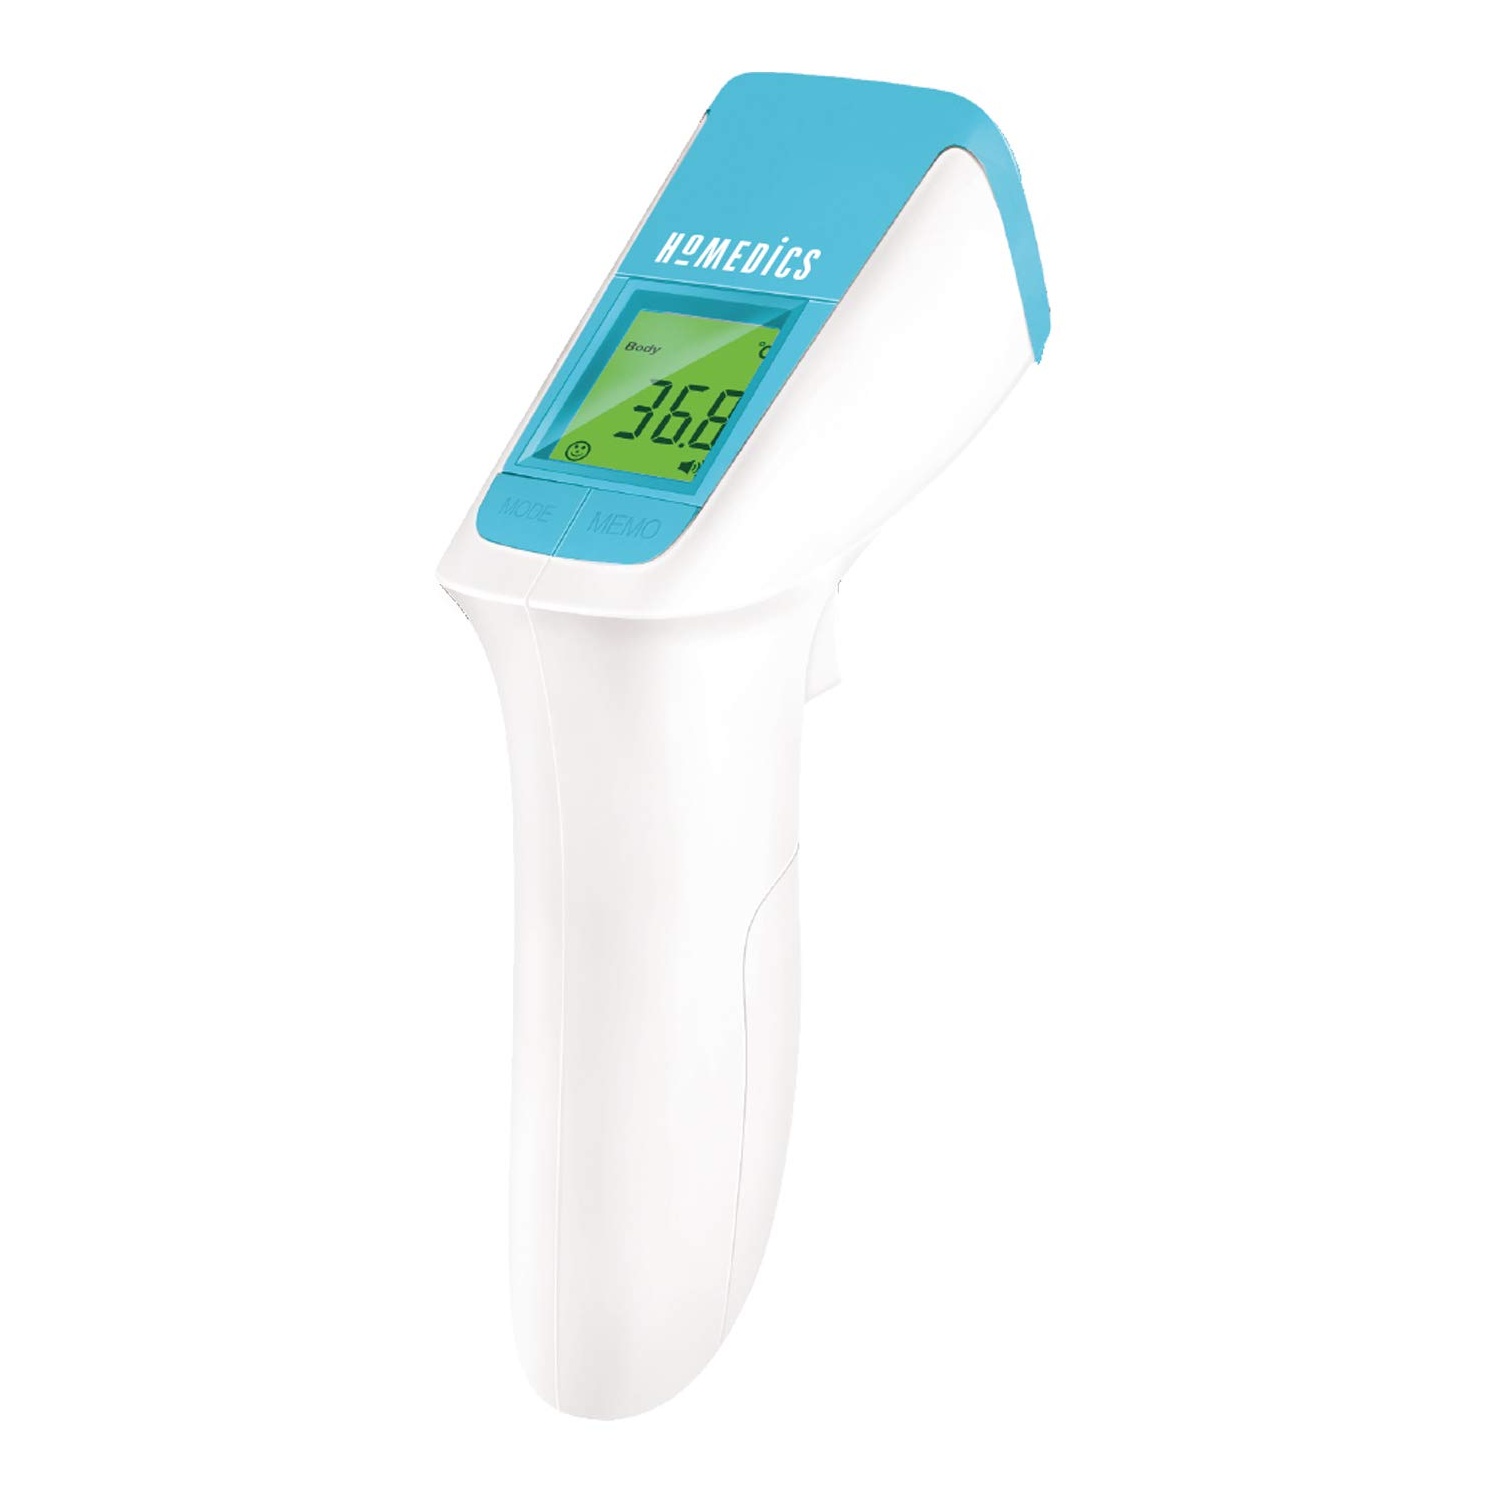 temporal thermometer